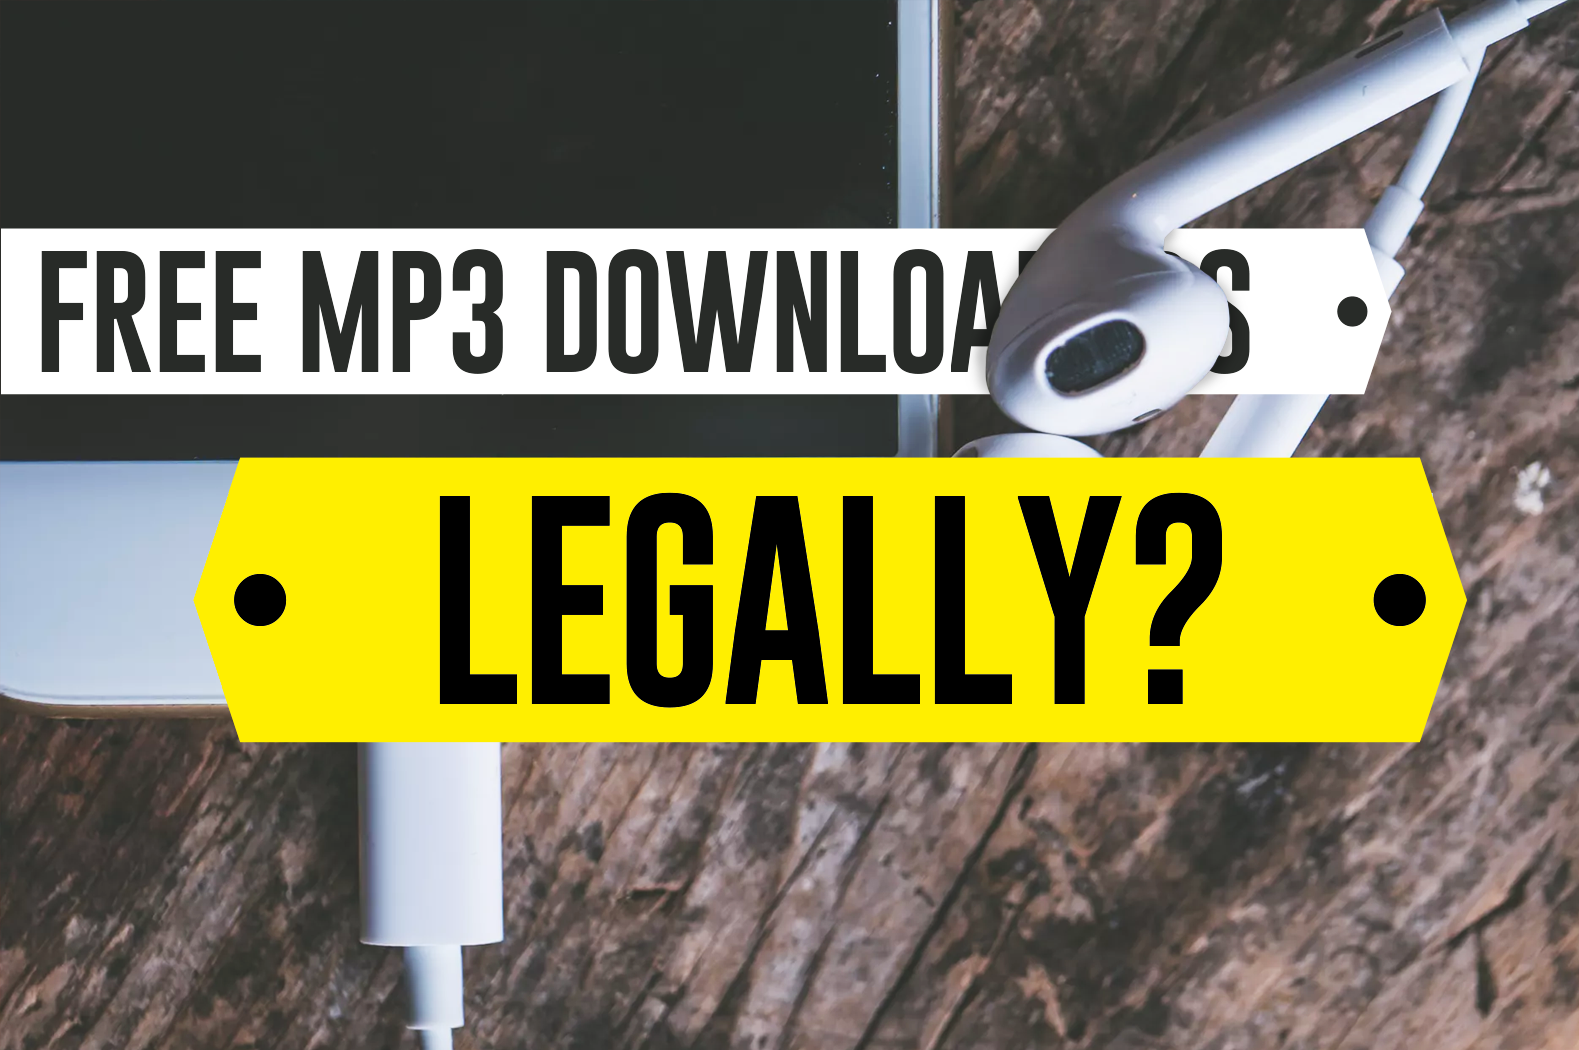 Search and download free music videos with these online downloaders that are best for downloading mp3 files